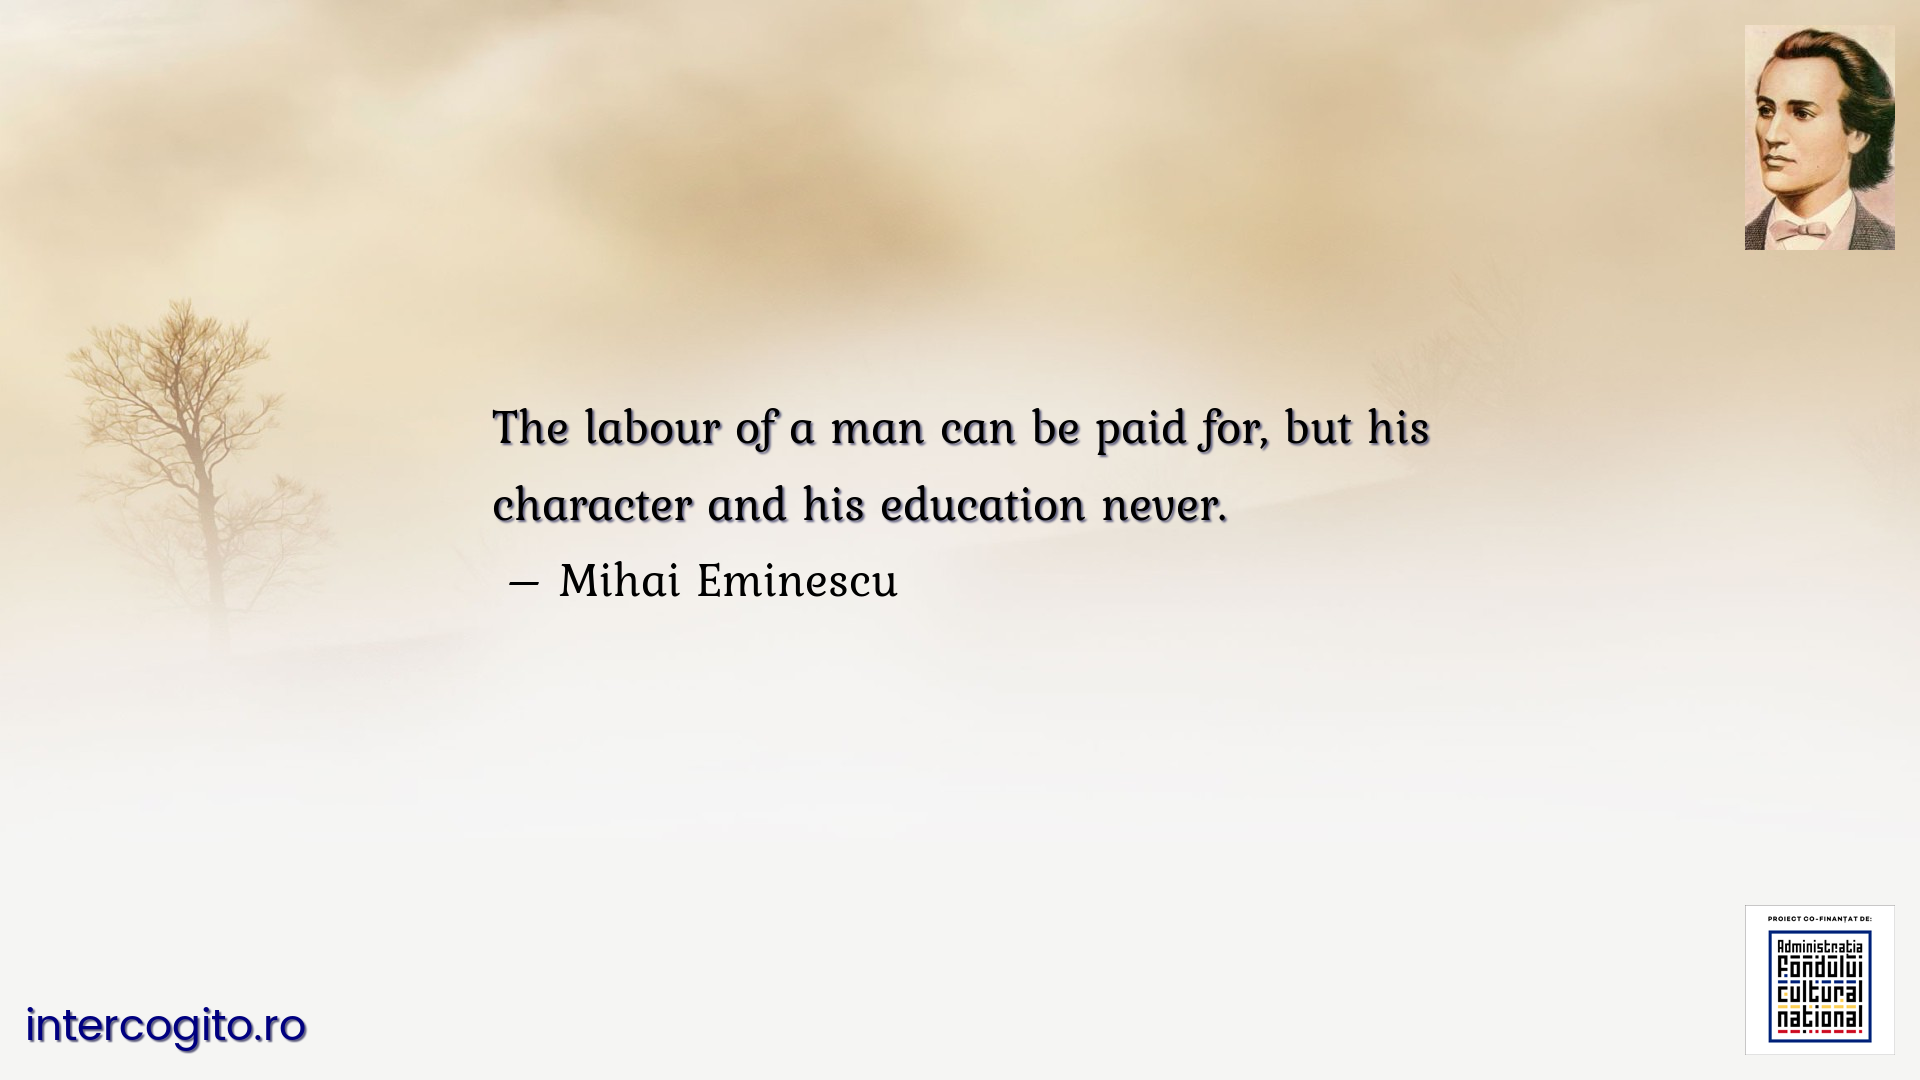 The labour of a man can be paid for, but his character and his education never.